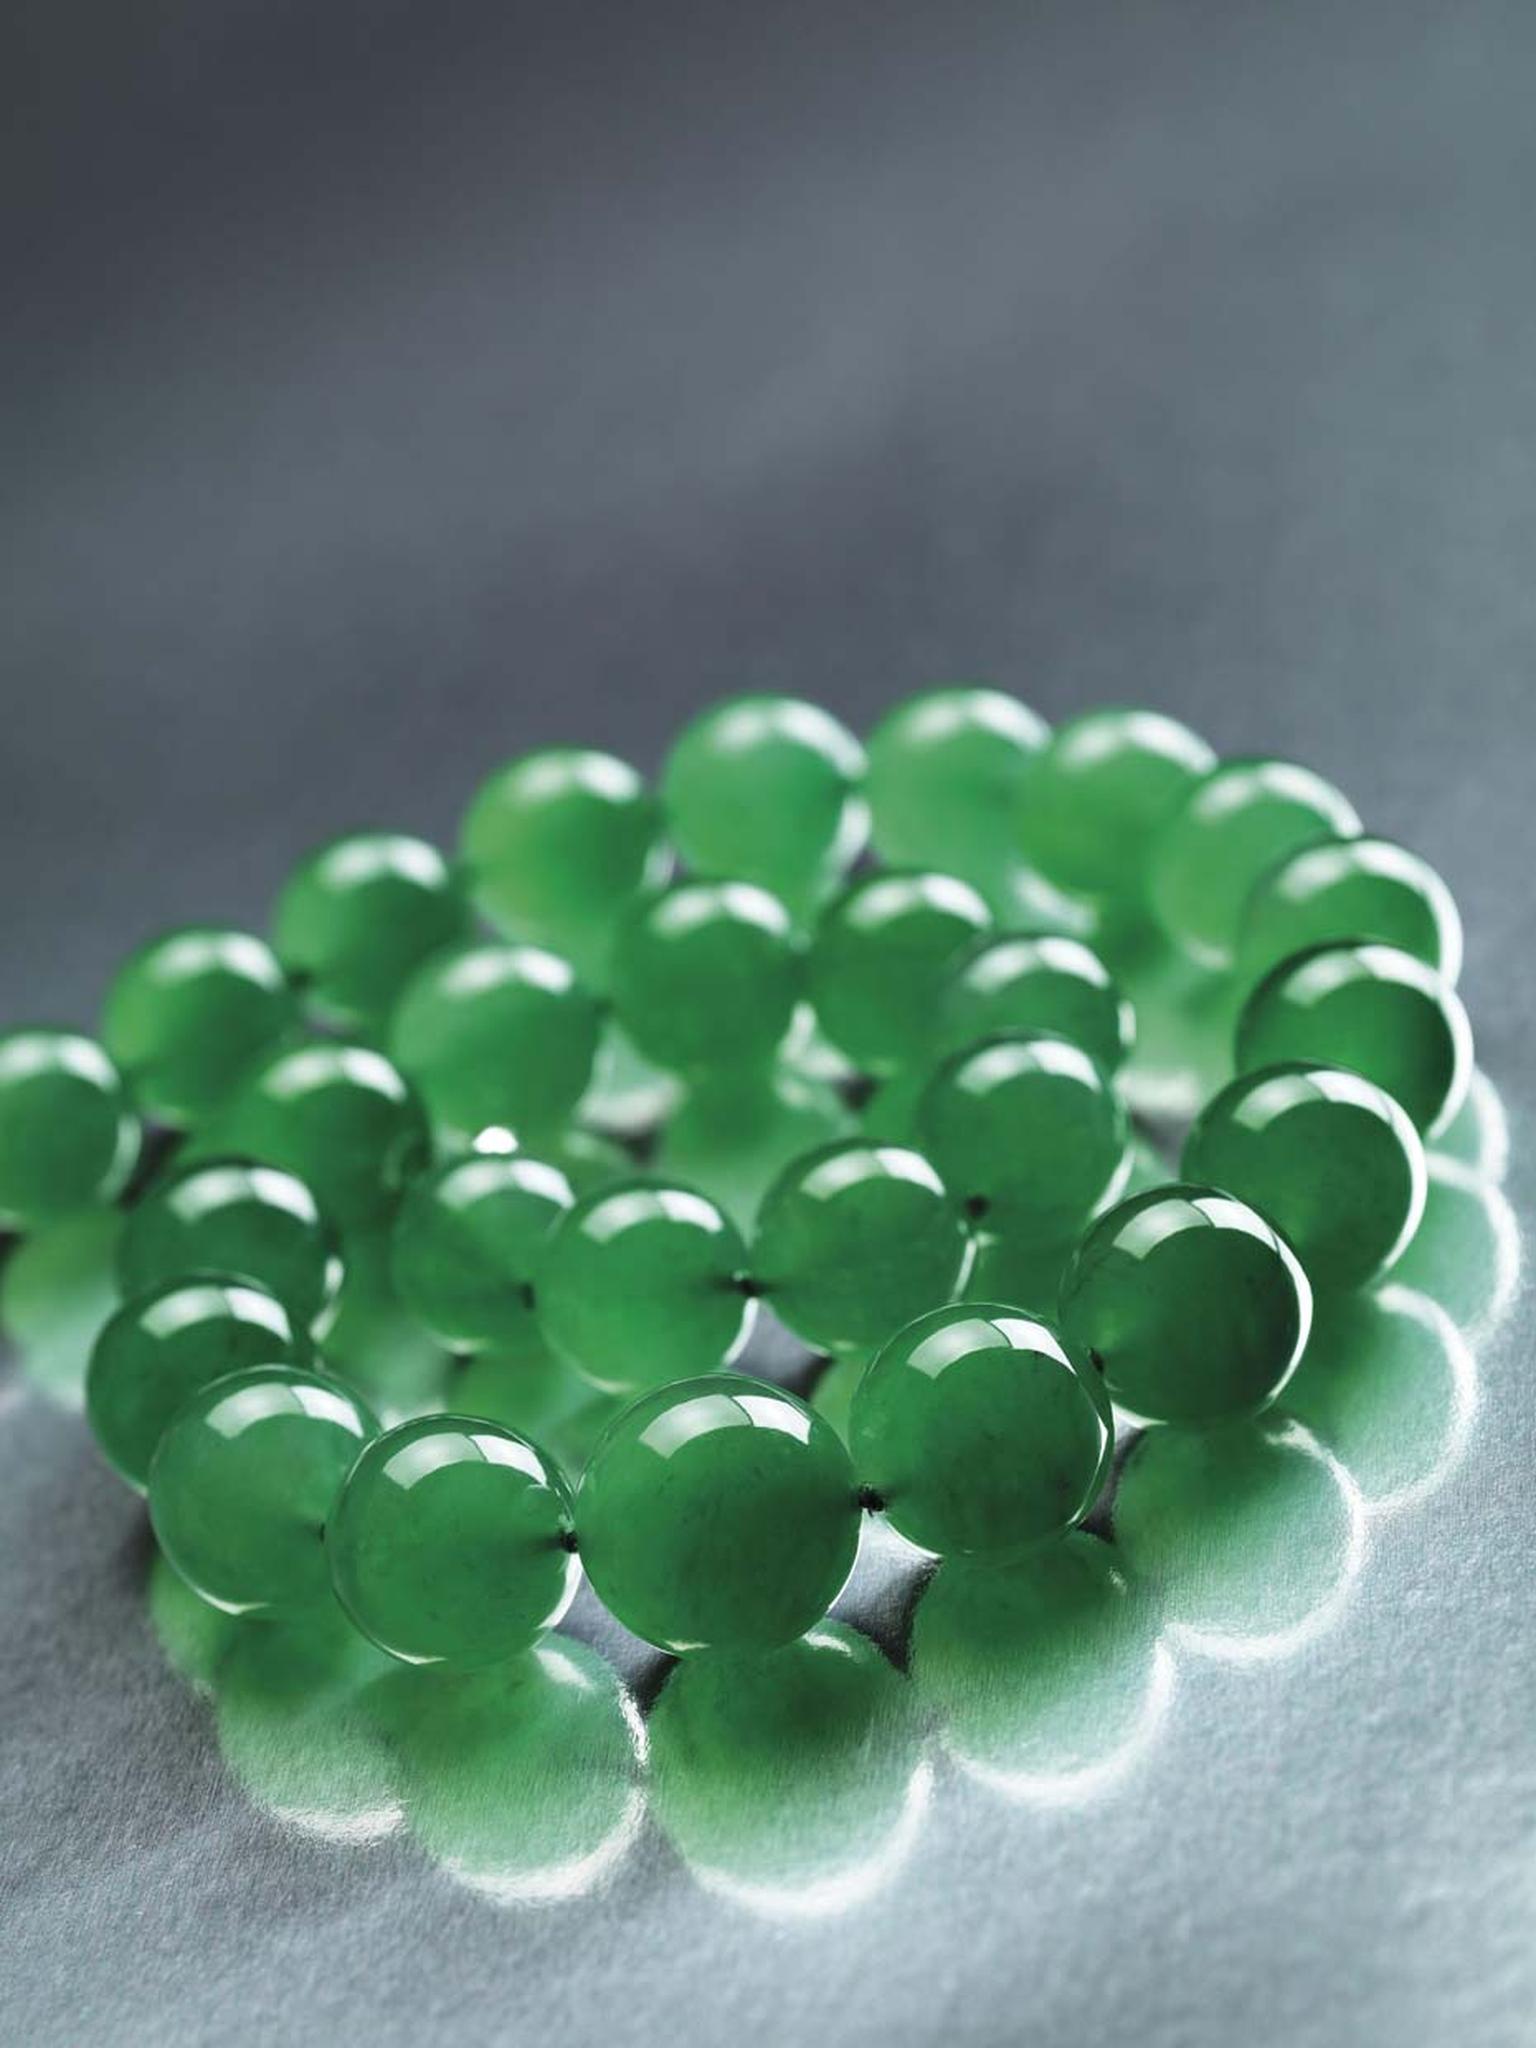 The 27 gigantic, vivid green jadeite beads in the Hutton-Mdivani jade necklace are all of excellent translucency and an extremely fine texture, with diameters ranging from 19.2mm to 15.4mm